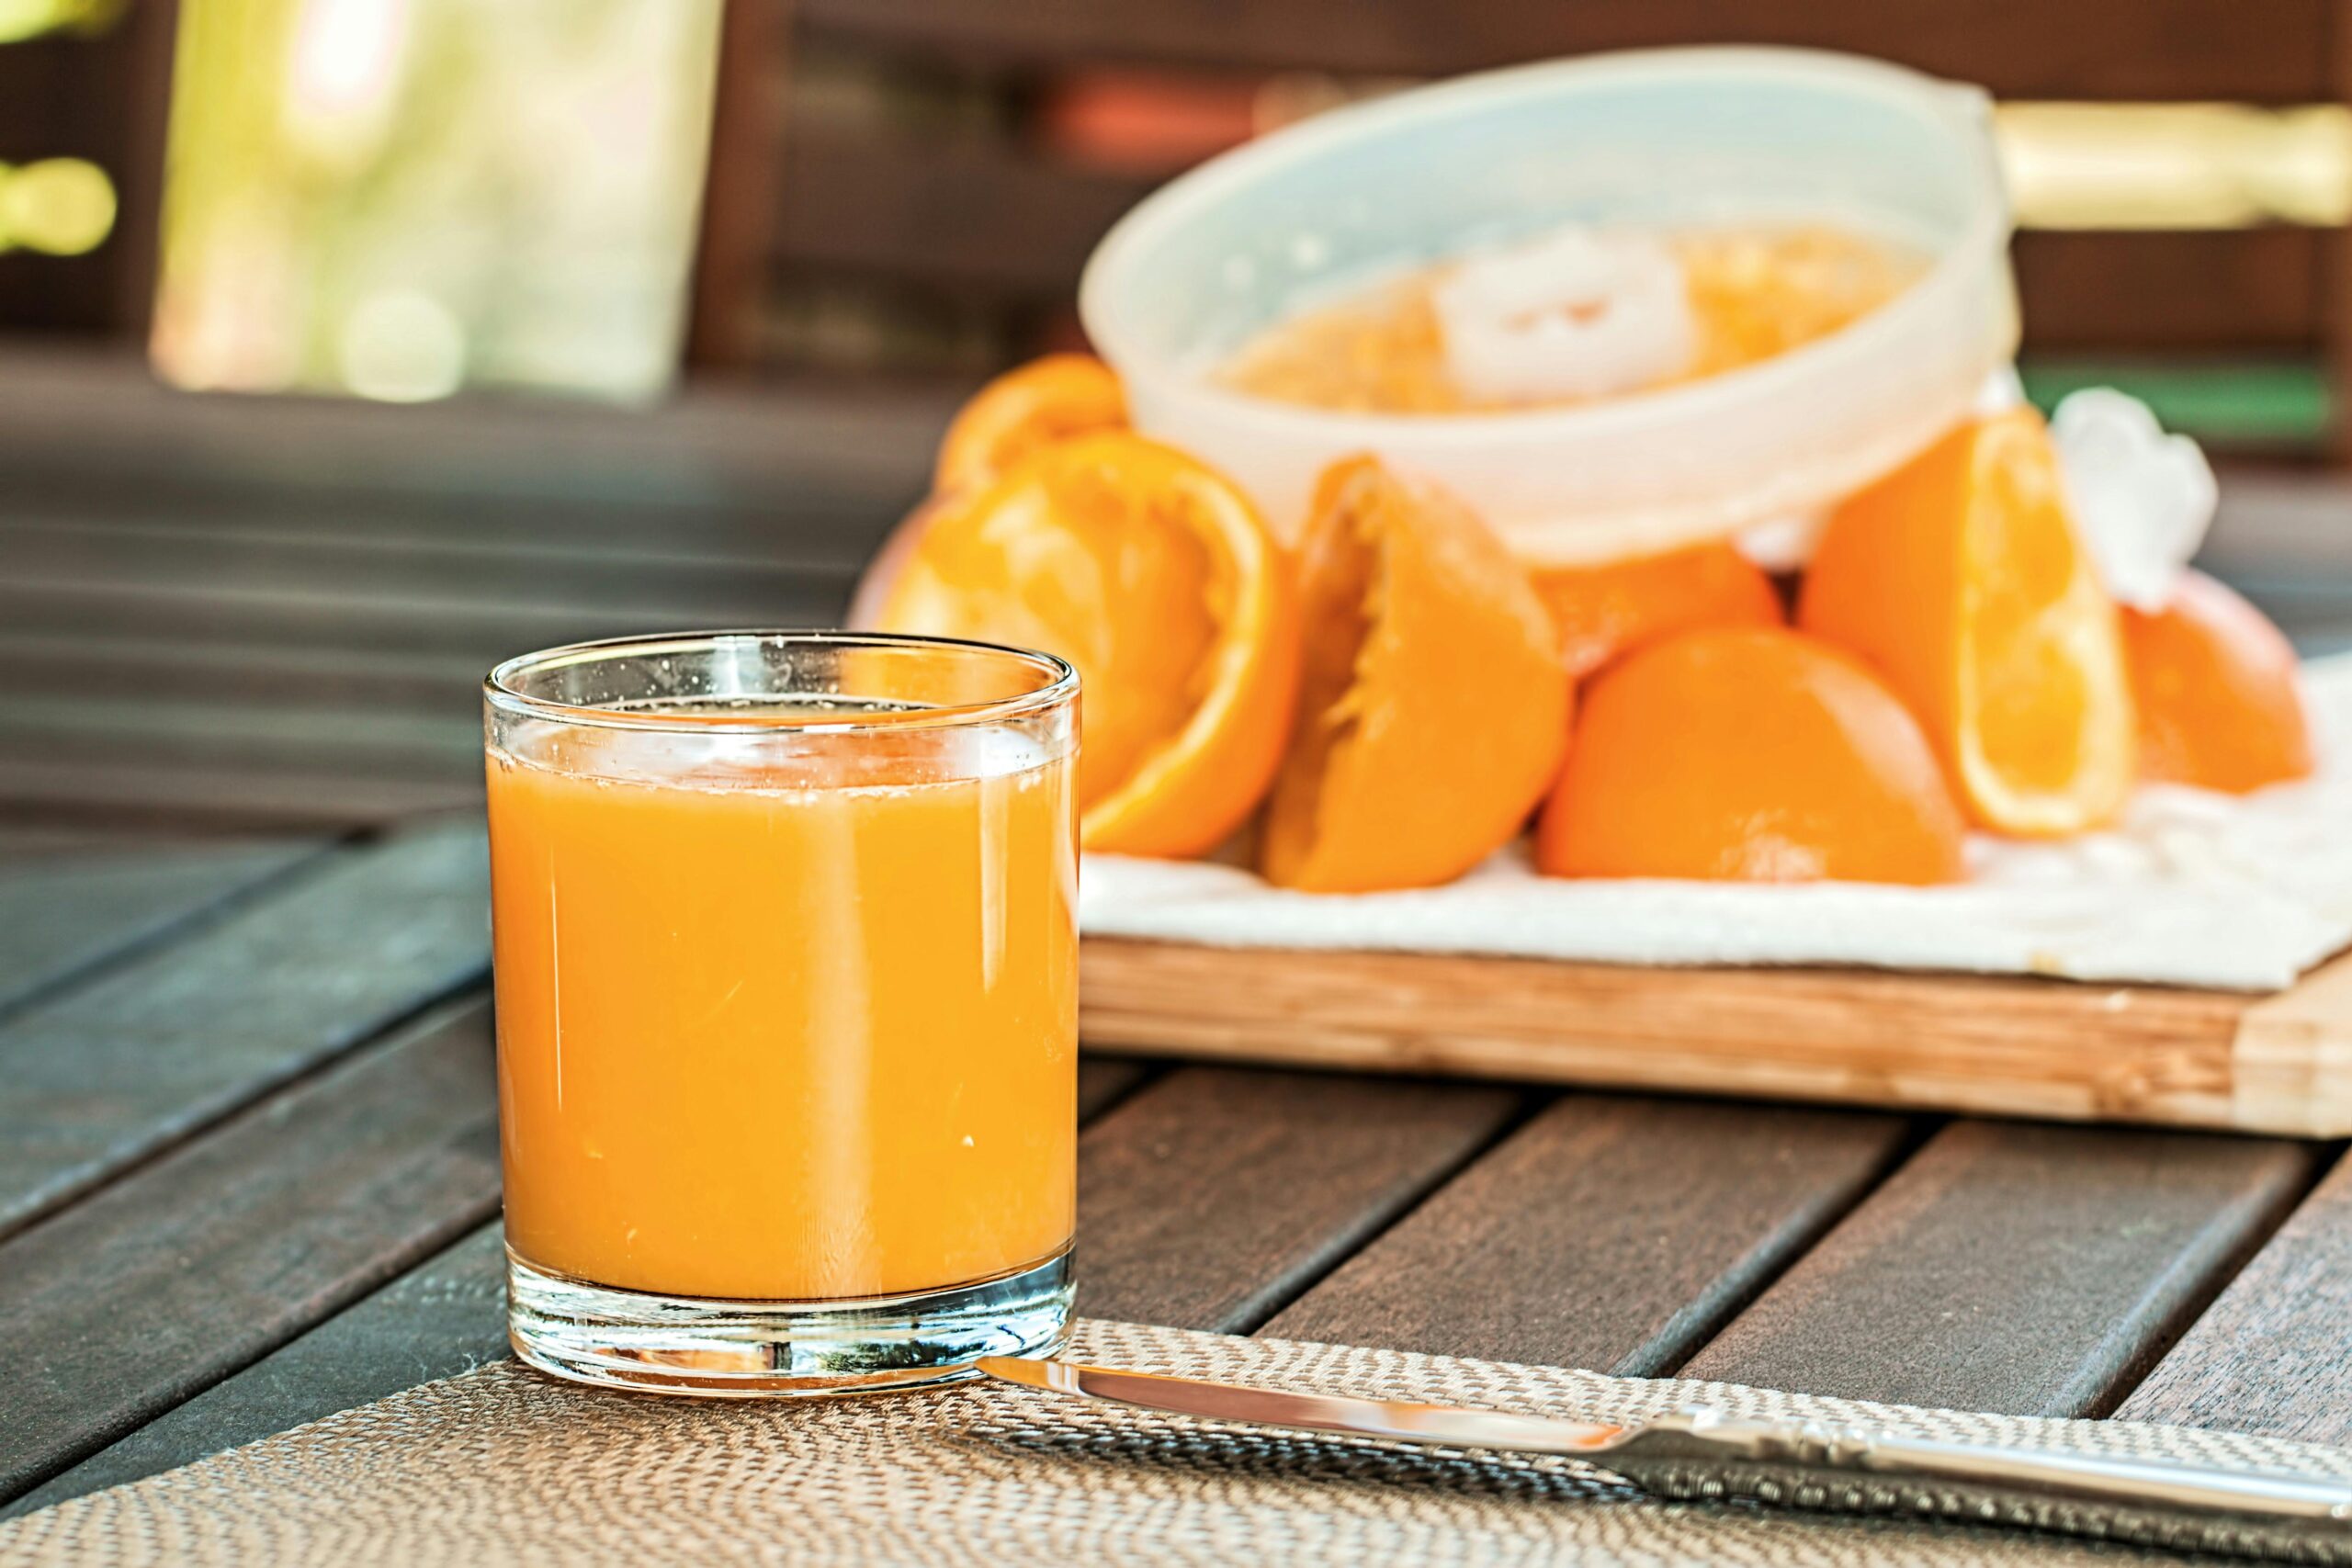 The ingredients in a cortisol cocktail are healthy for the body and cause less stress and anxiety. Pictured: Freshly squeezed orange juice